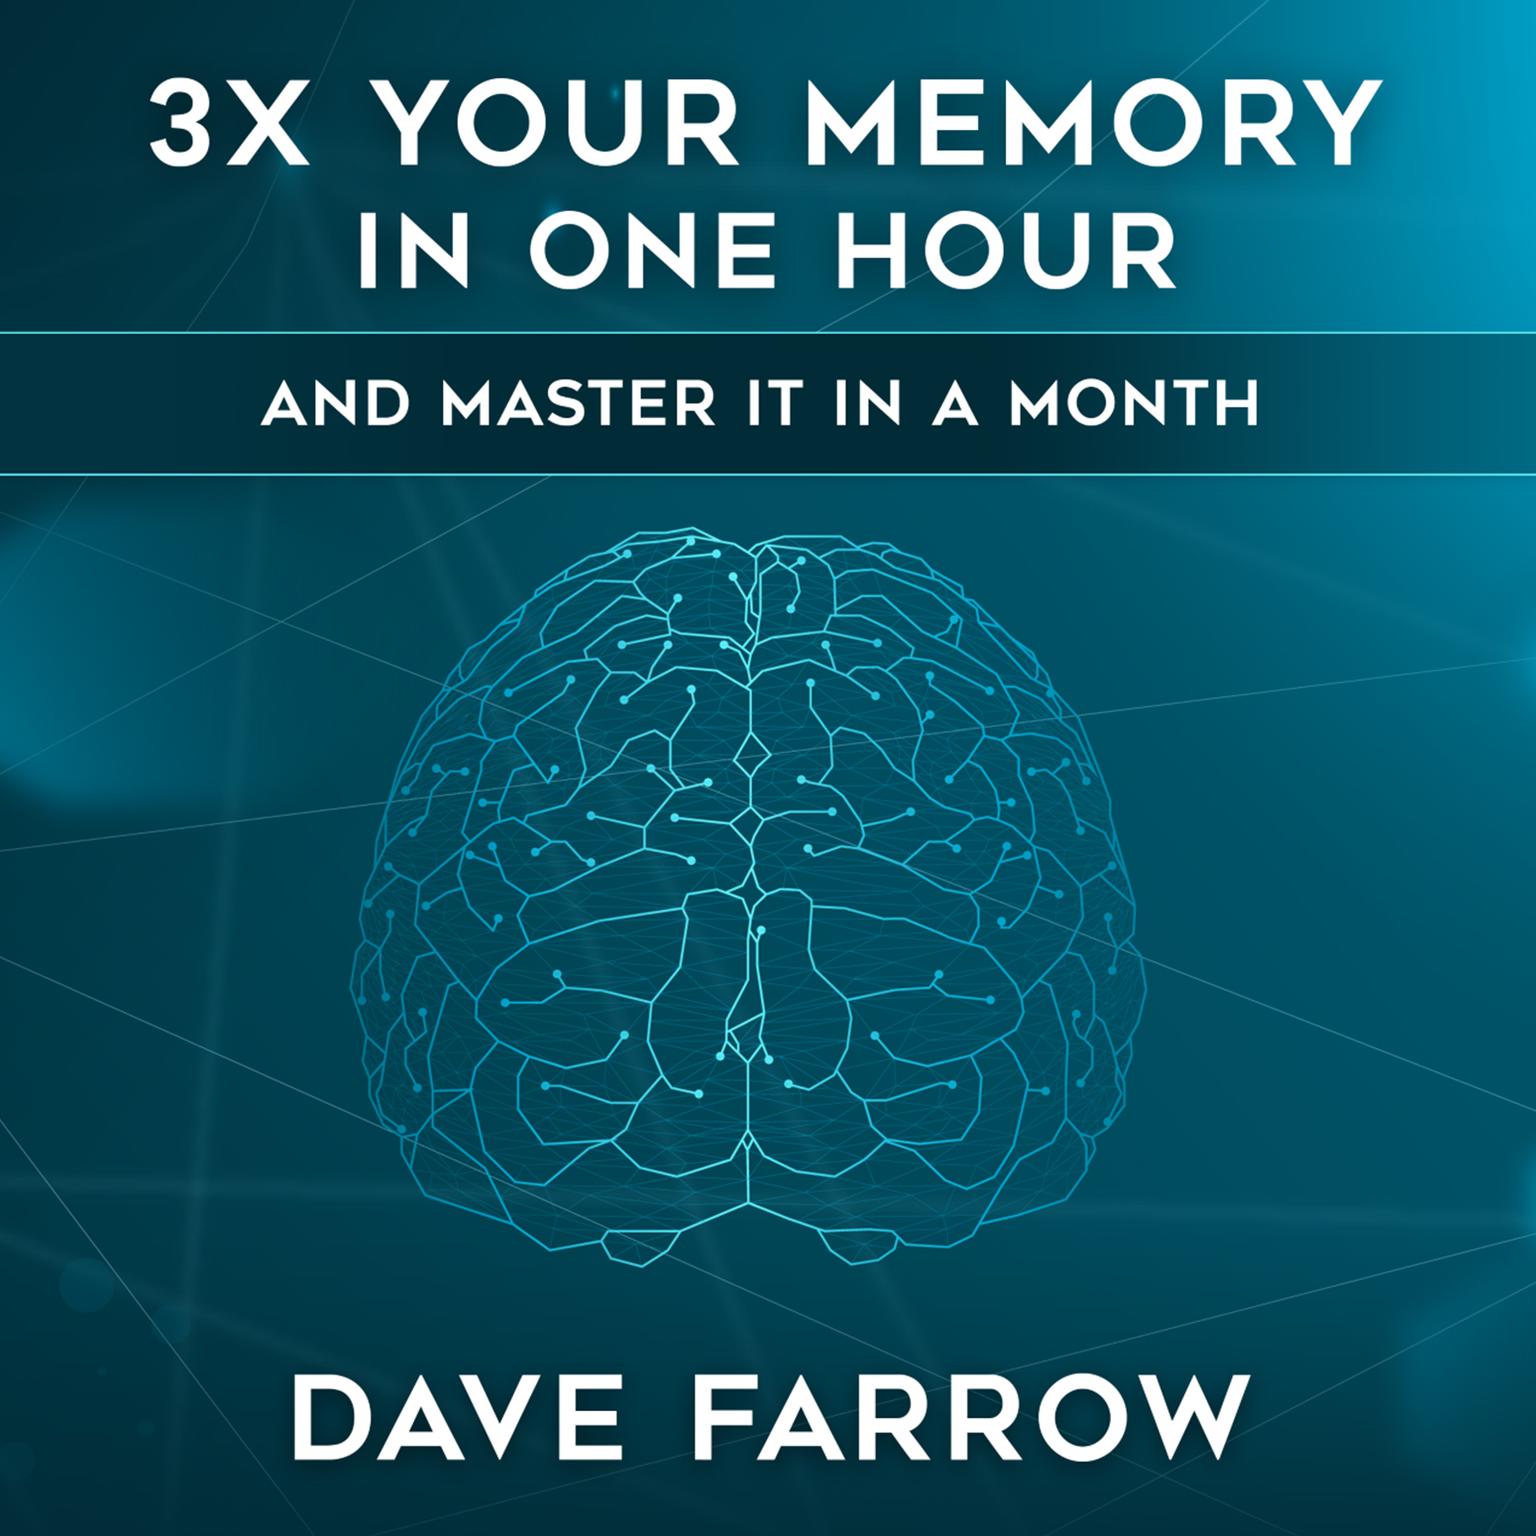 3x Your Memory in One Hour: Farrow Method Memory Mastery in a Month Audiobook, by Dave Farrow